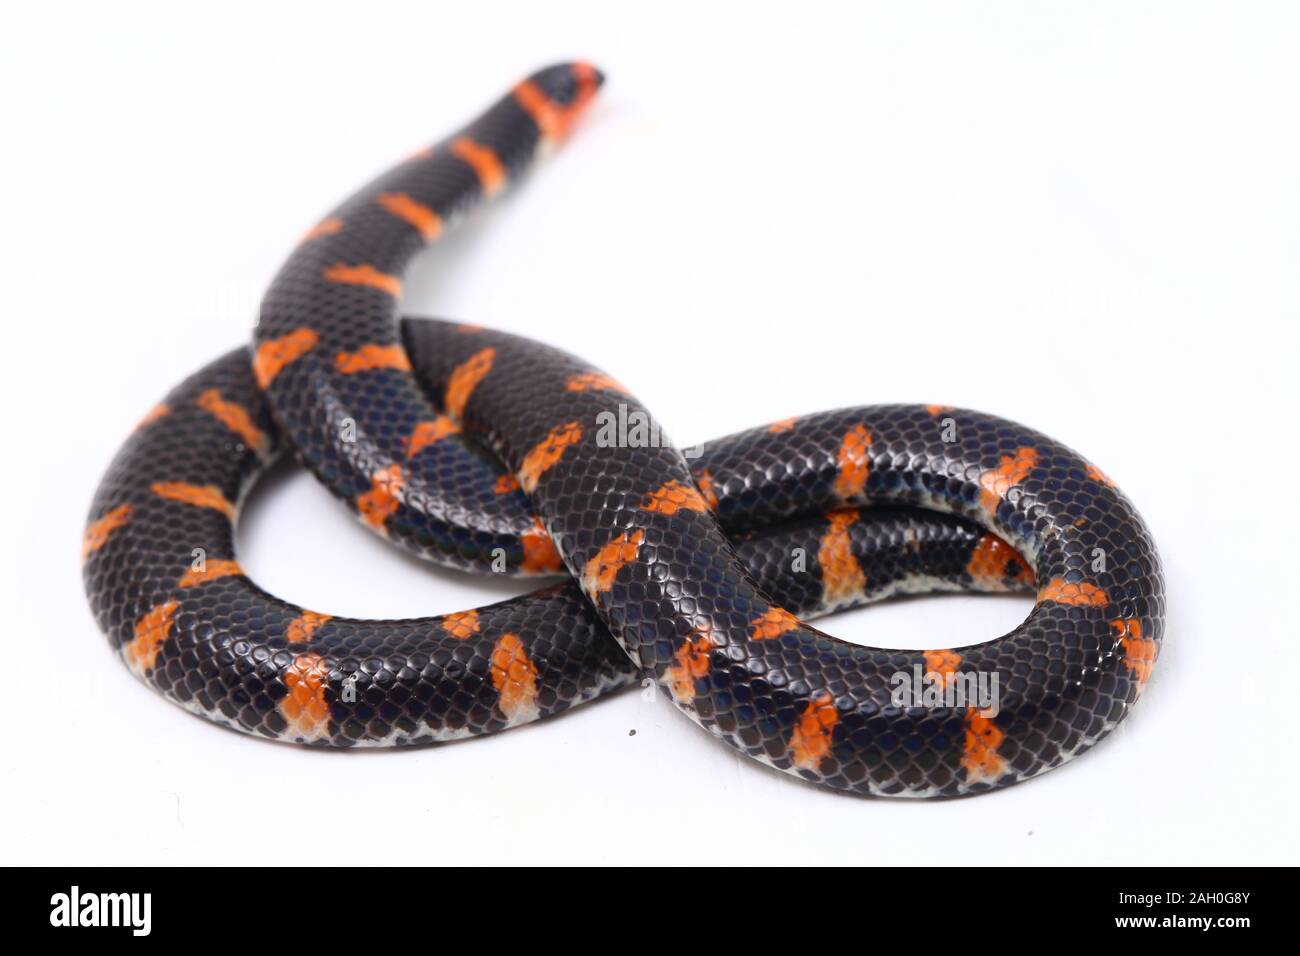 Red-tailed Pipe Snake stock photo - Minden Pictures